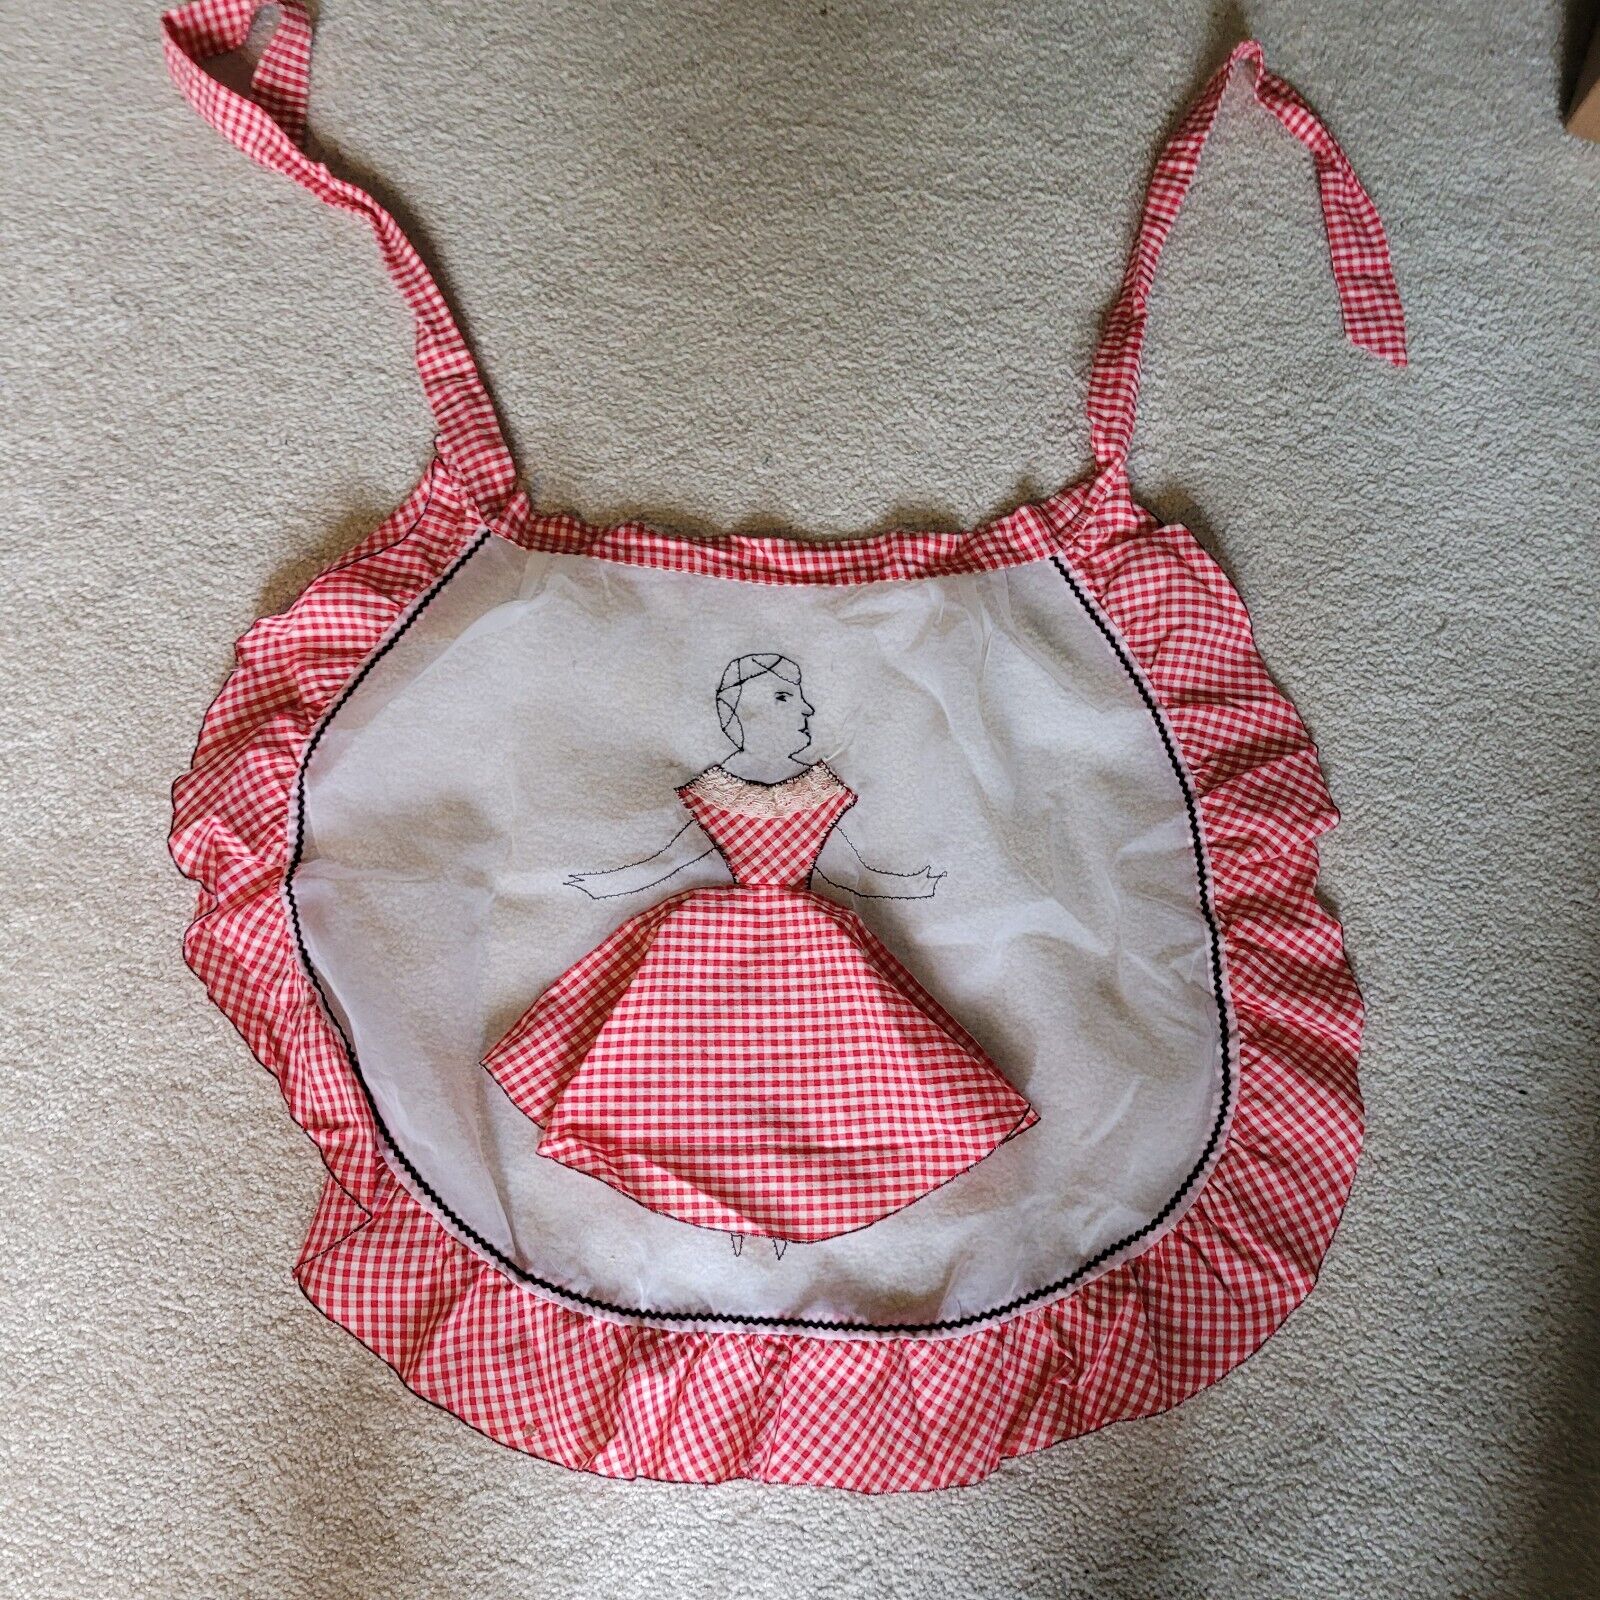 Vintage 50s handmade Apron Embroidery Peek a Boo lady red gingham dress